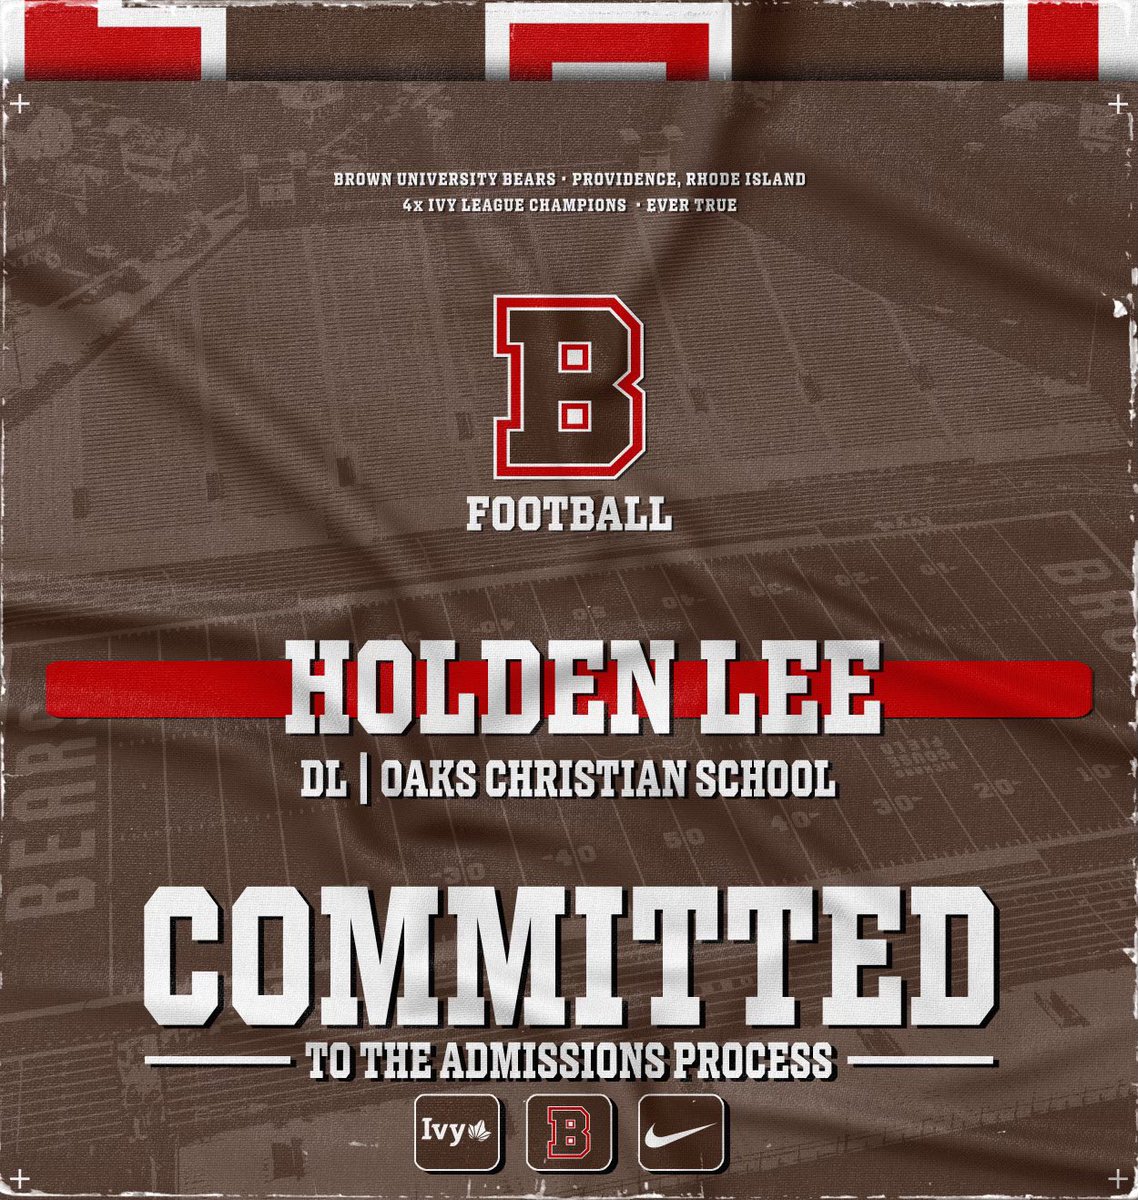 Extremely excited to announce I am committed to Brown University! @BrownU_Football Thank you to my family, coaches, and friends that have supported me along the way!
@BrownKai 
@CoachC_C 
@oclionsfootball @MattODonnell27 @coachDjackson1 @Showcase_Keith #GoBruno #Evertrue